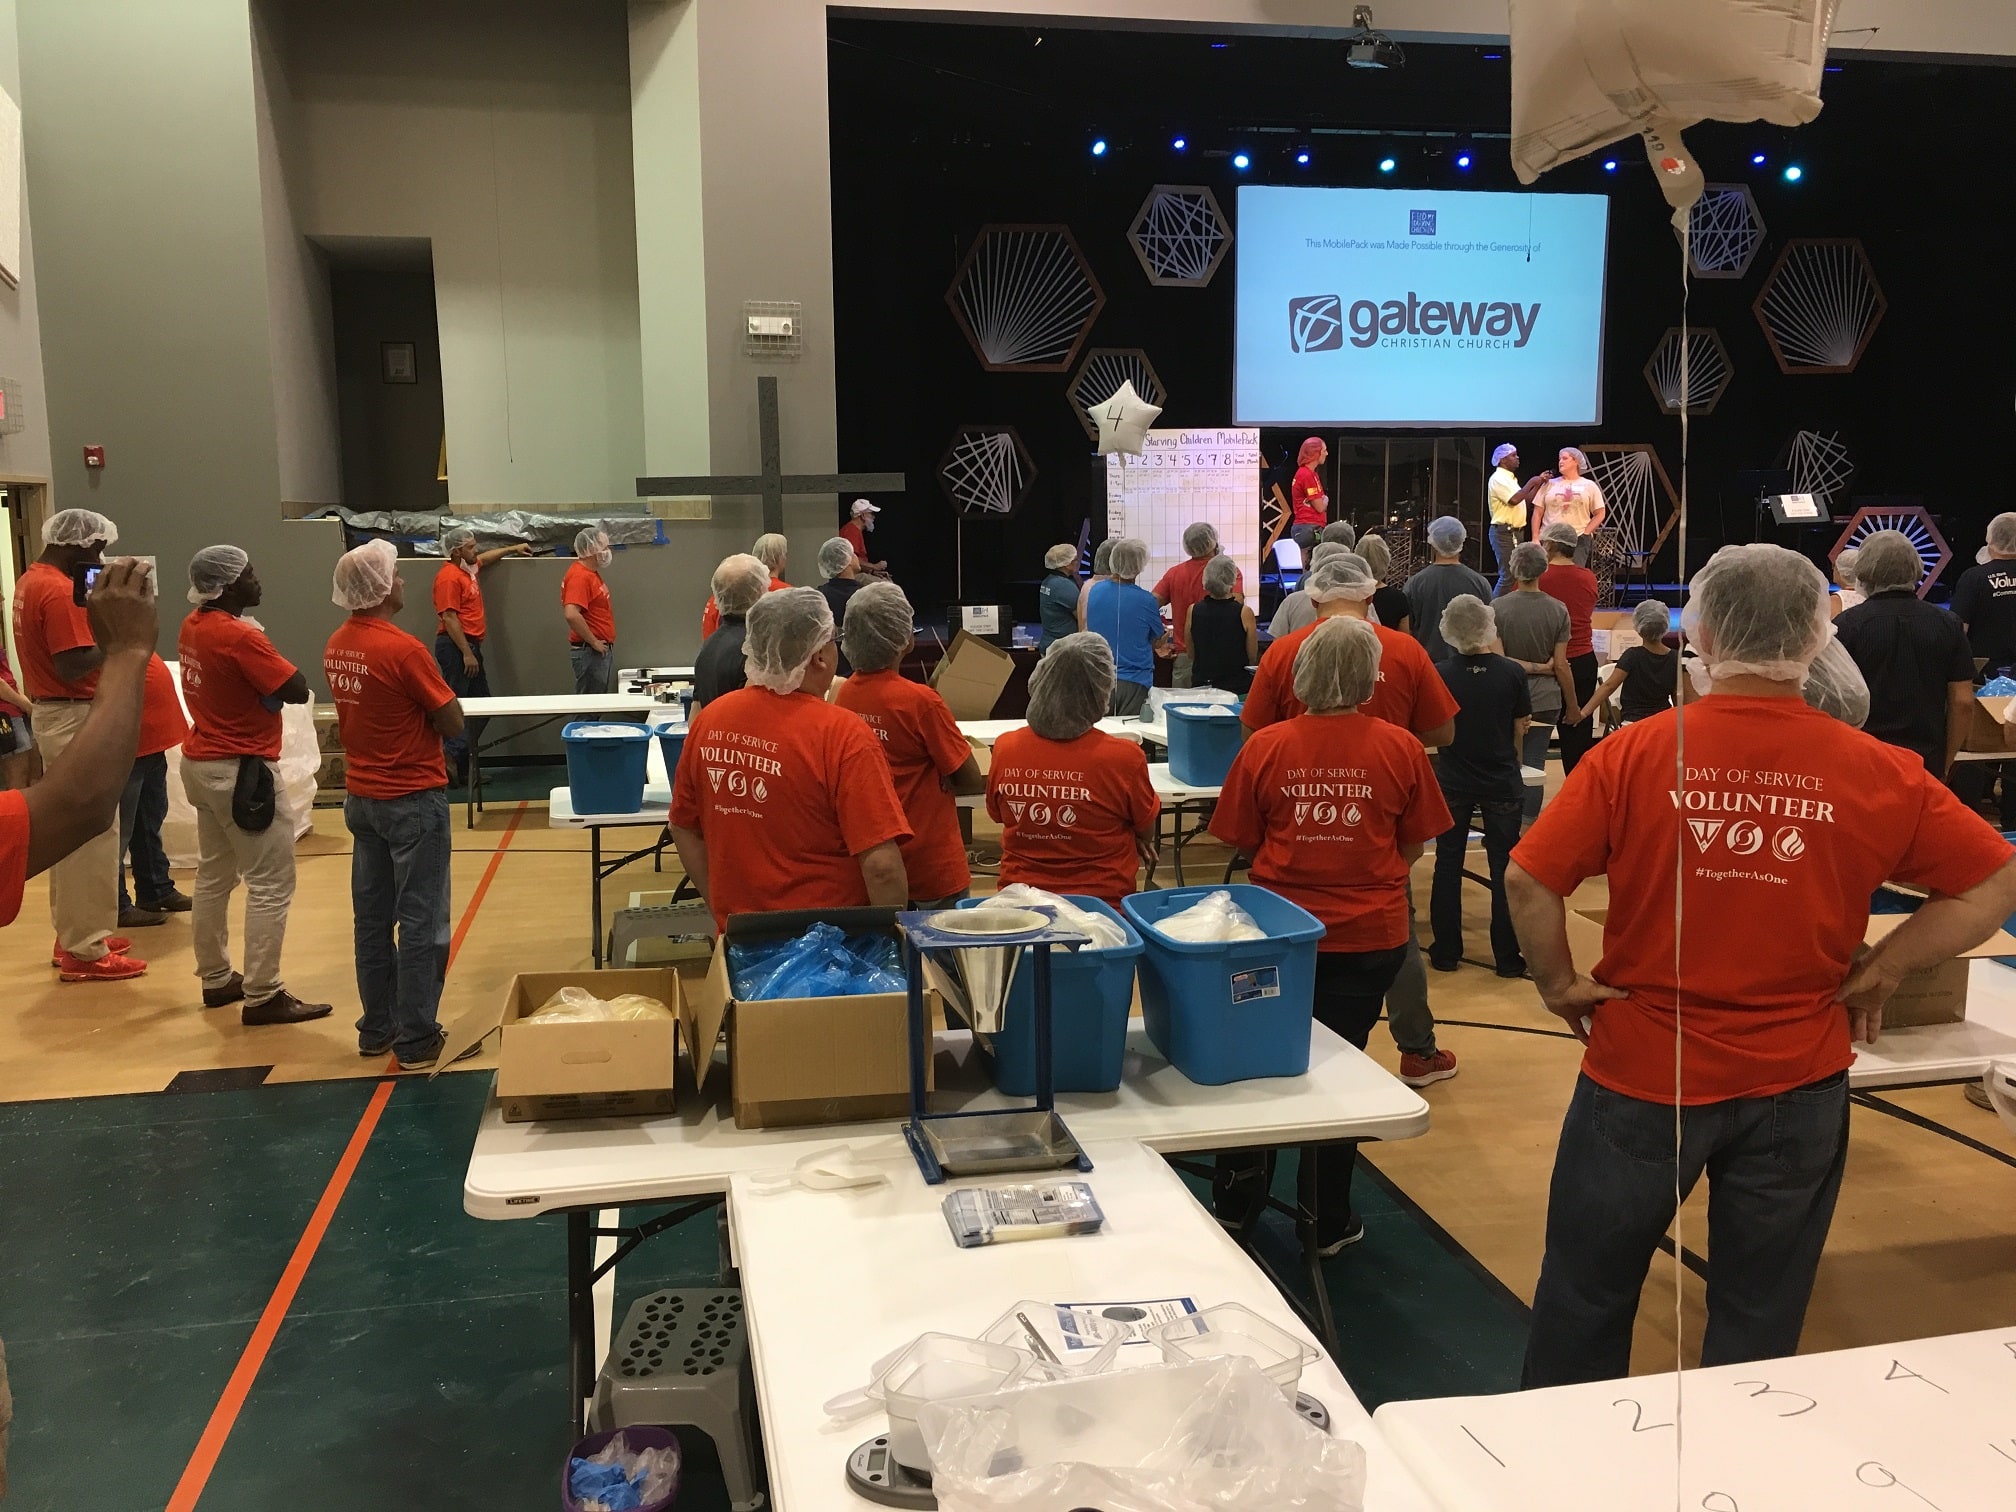 This image is of TW Constructors volunteering a day of service to make and hand out lunches for children in 2019